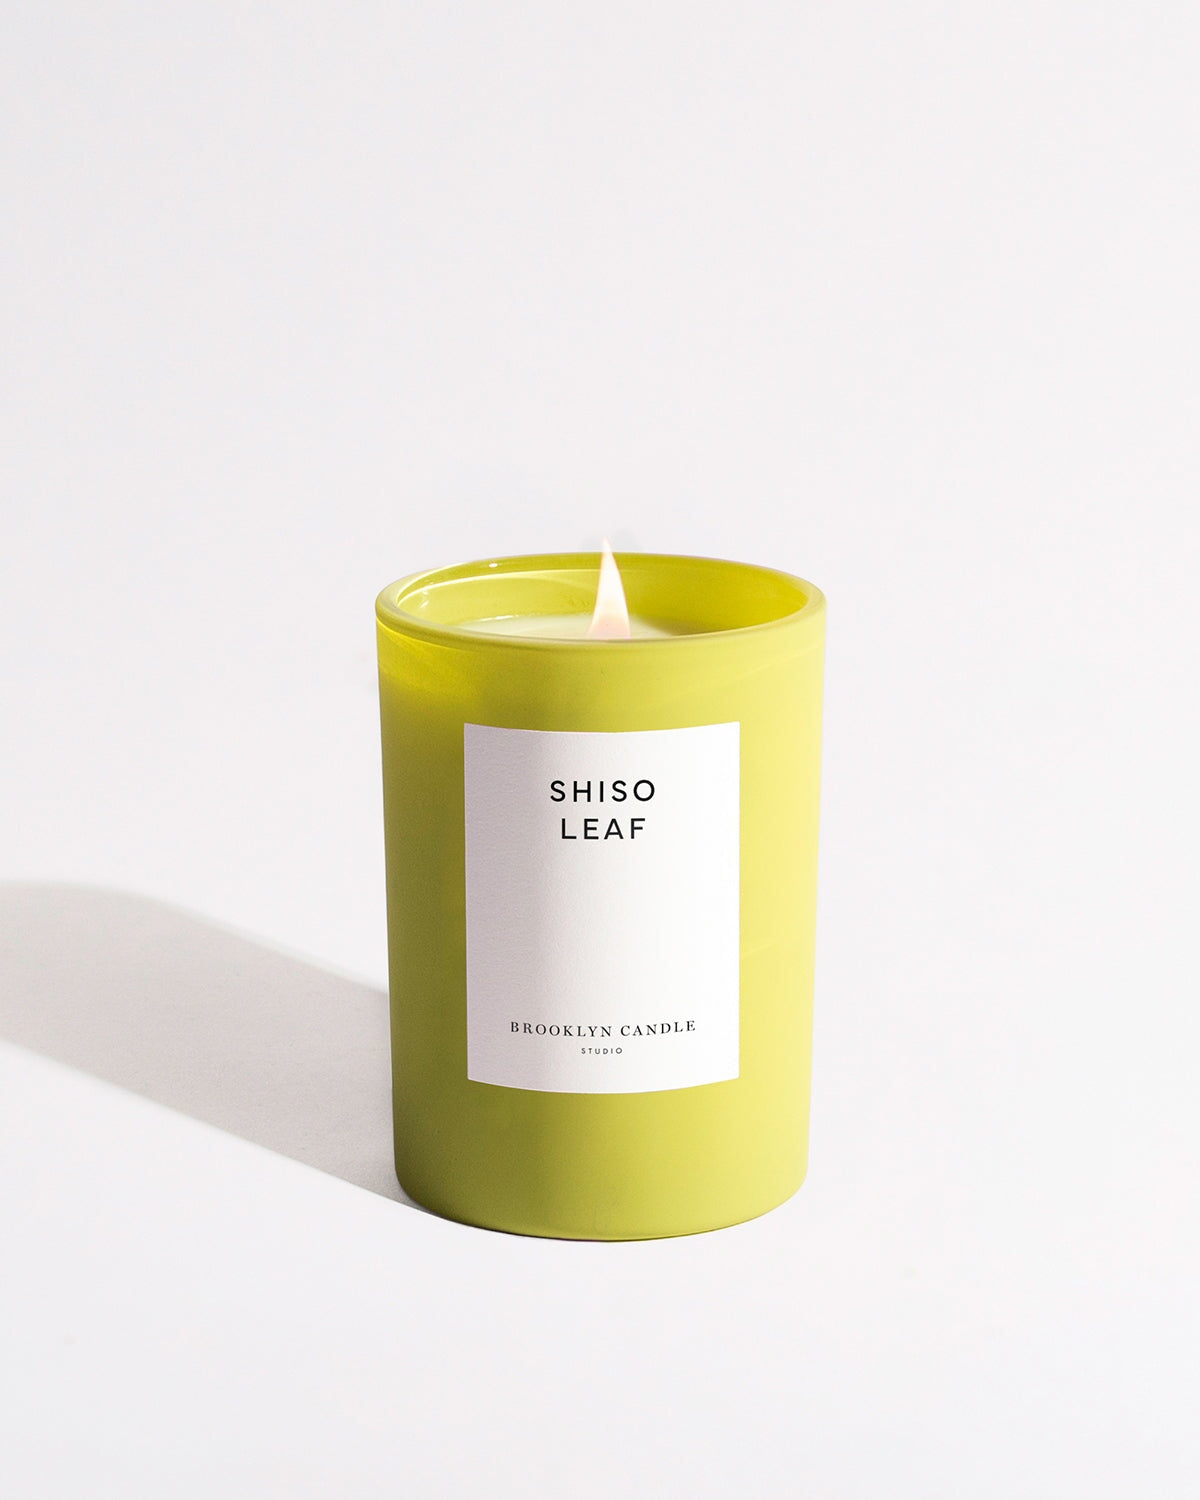 Shiso Leaf Summer Edition Candle Herbarium Collection Brooklyn Candle Studio 